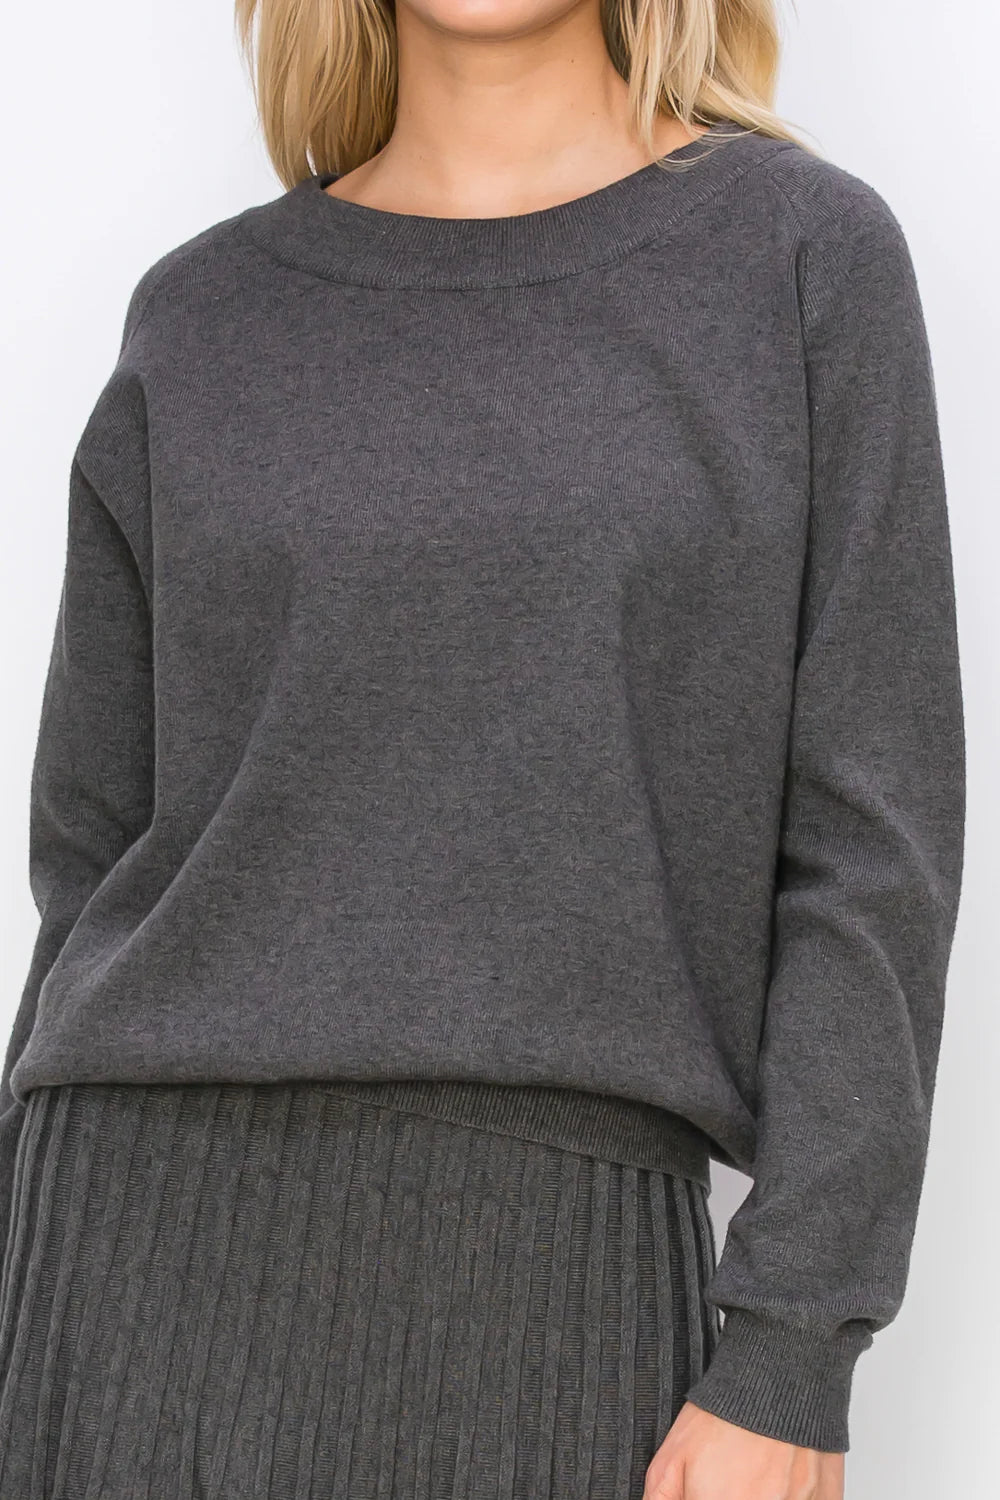 Sandy Knitted Sweater - Charcoal Sweaters JOH Apparel   